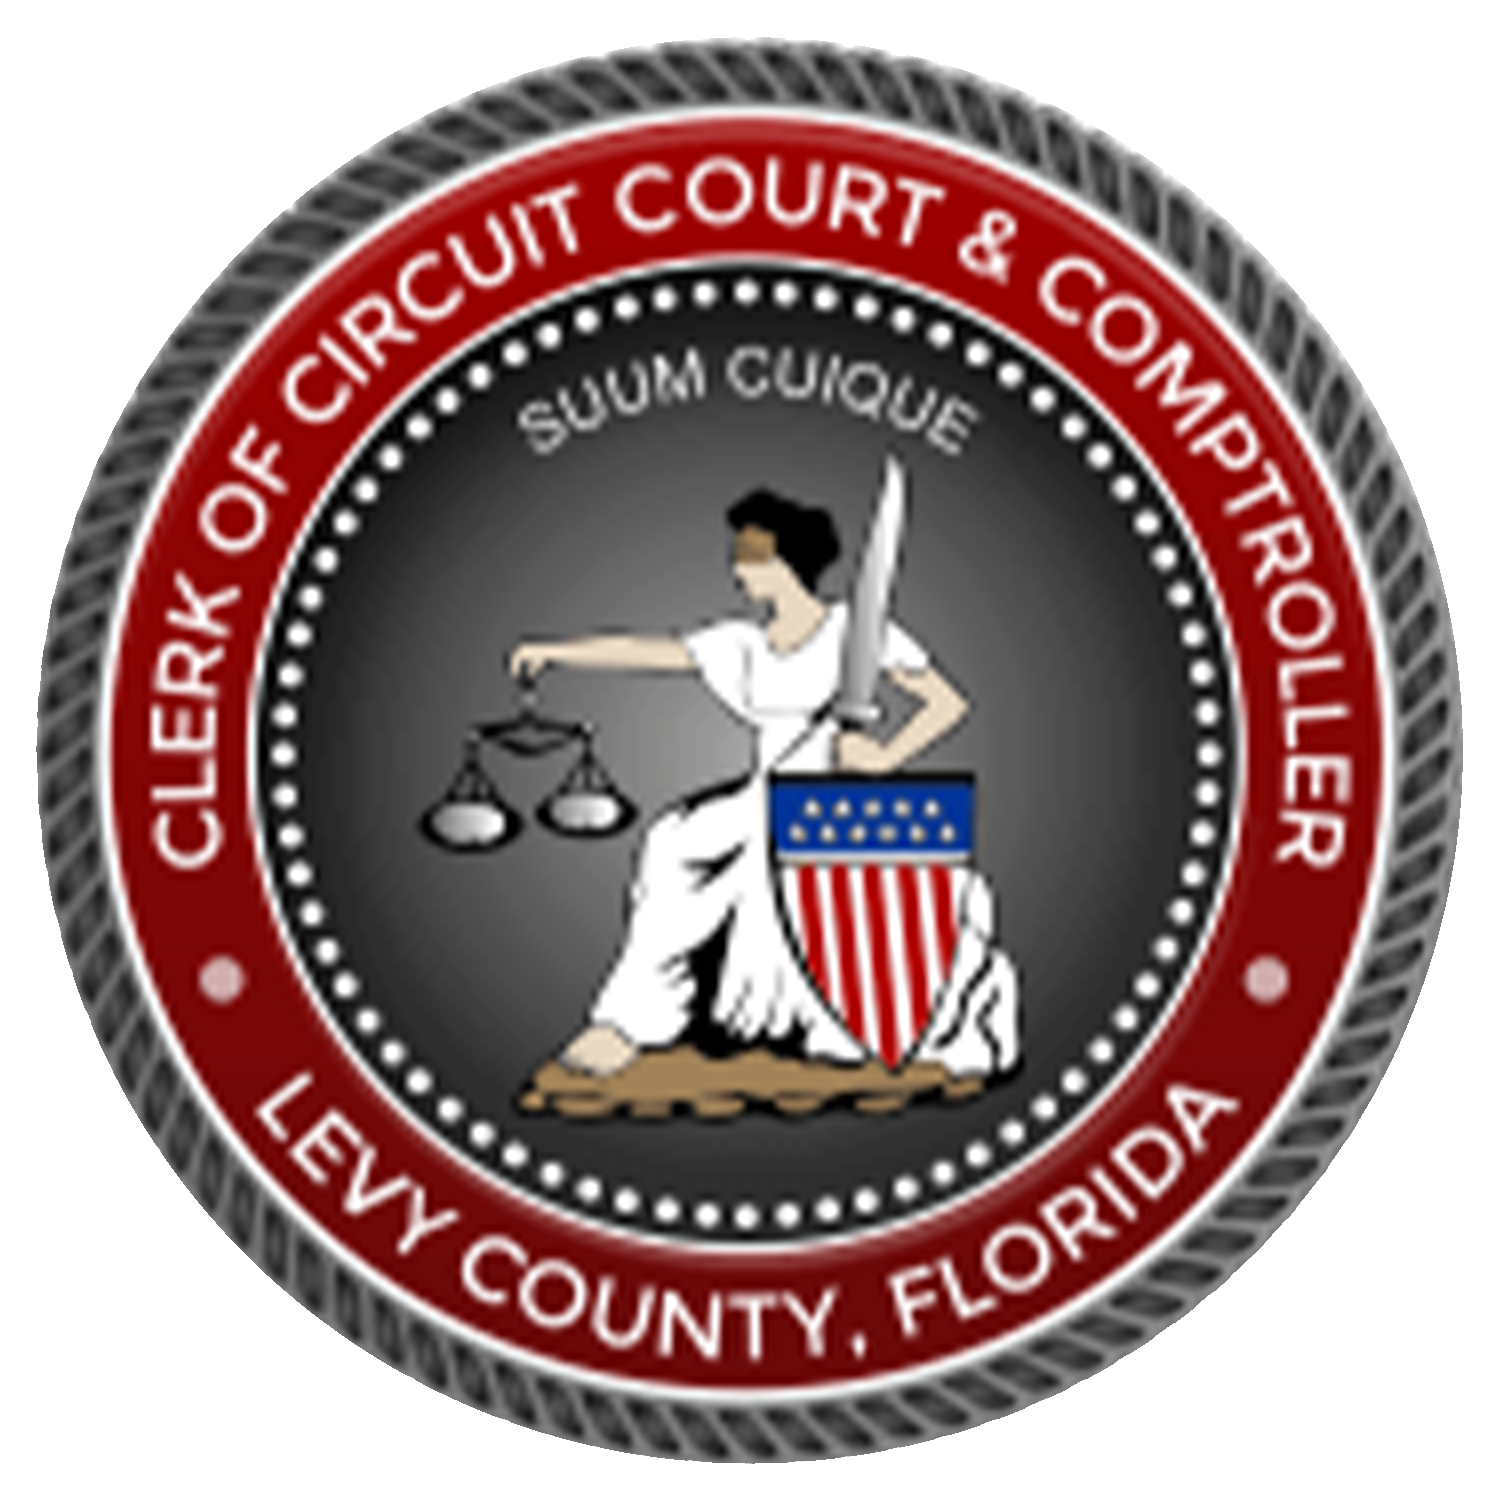 Official logo of the Levy County court of clerk